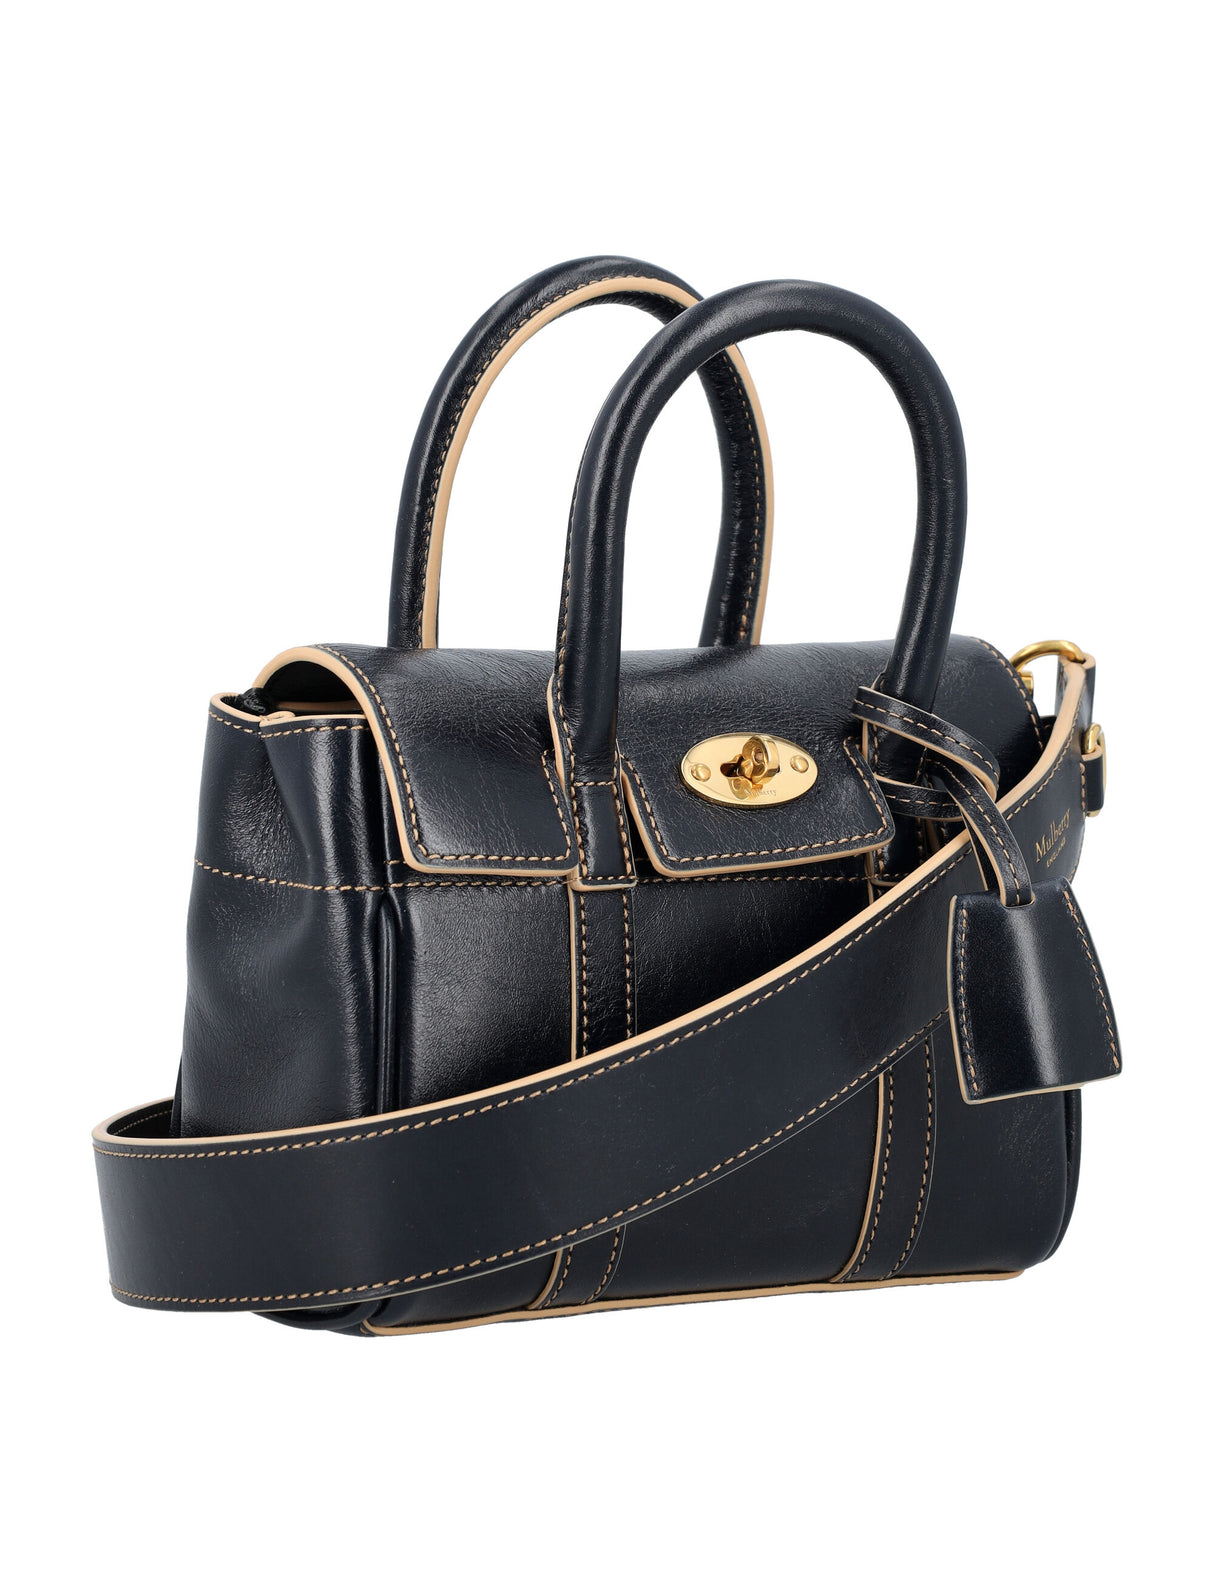 MULBERRY Mini Bayswater Navy Leather Handbag with Contrast Stitching and Soft Gold Details - 18.5x12.5x8 cm